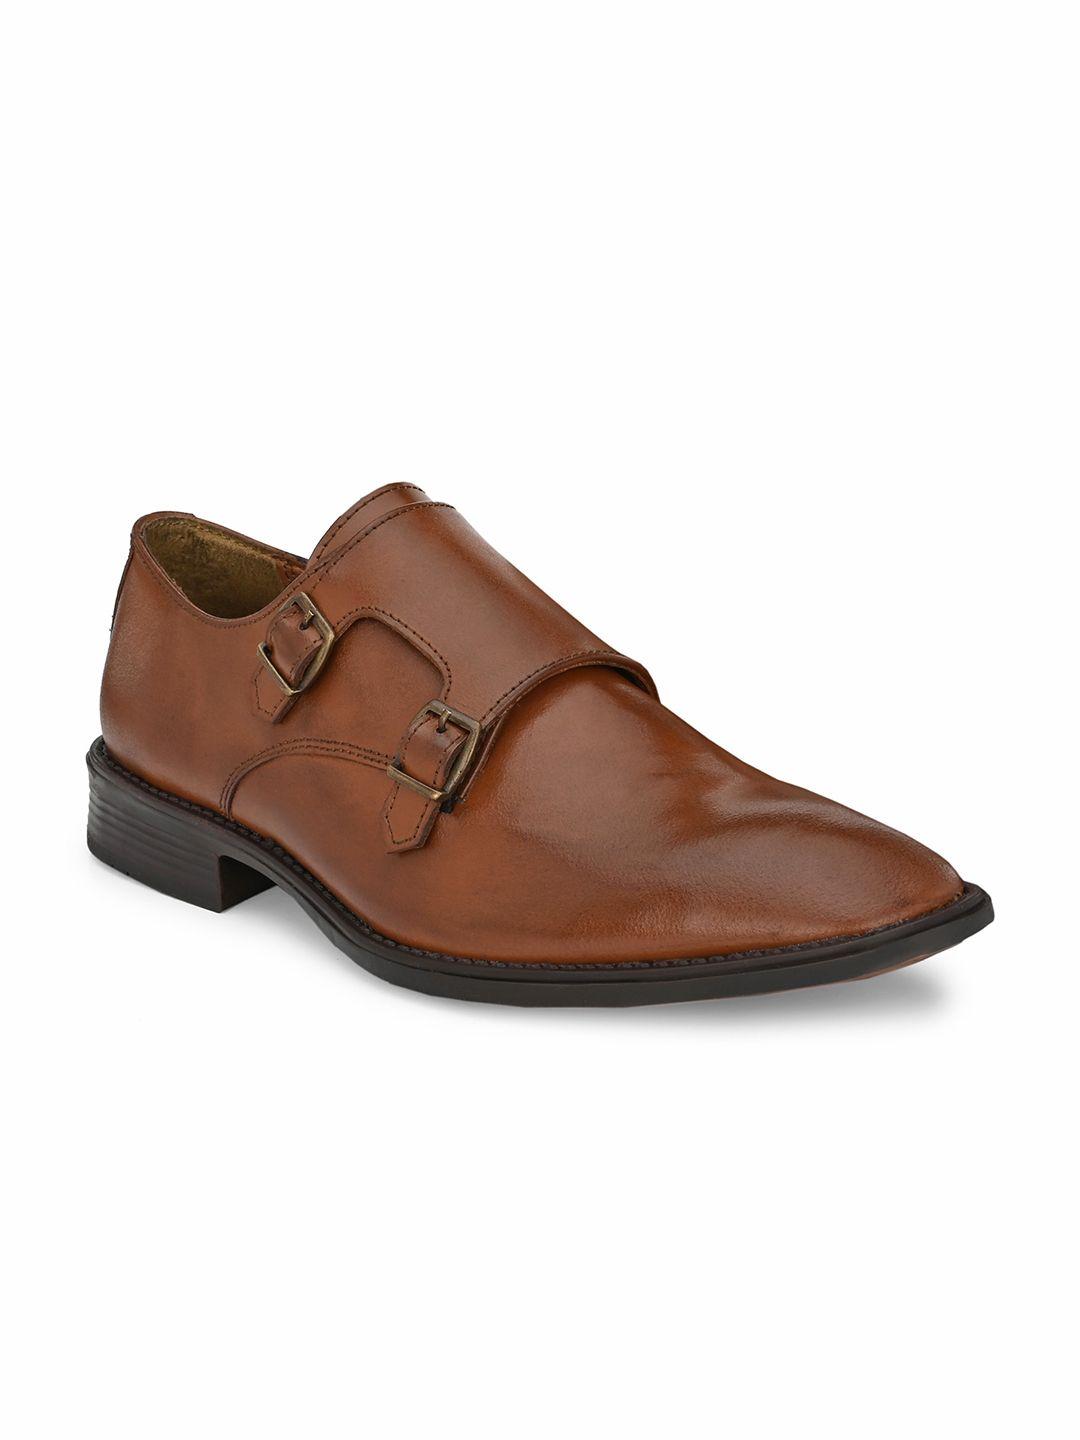 carlo romano men tan brown solid leather formal monk shoes